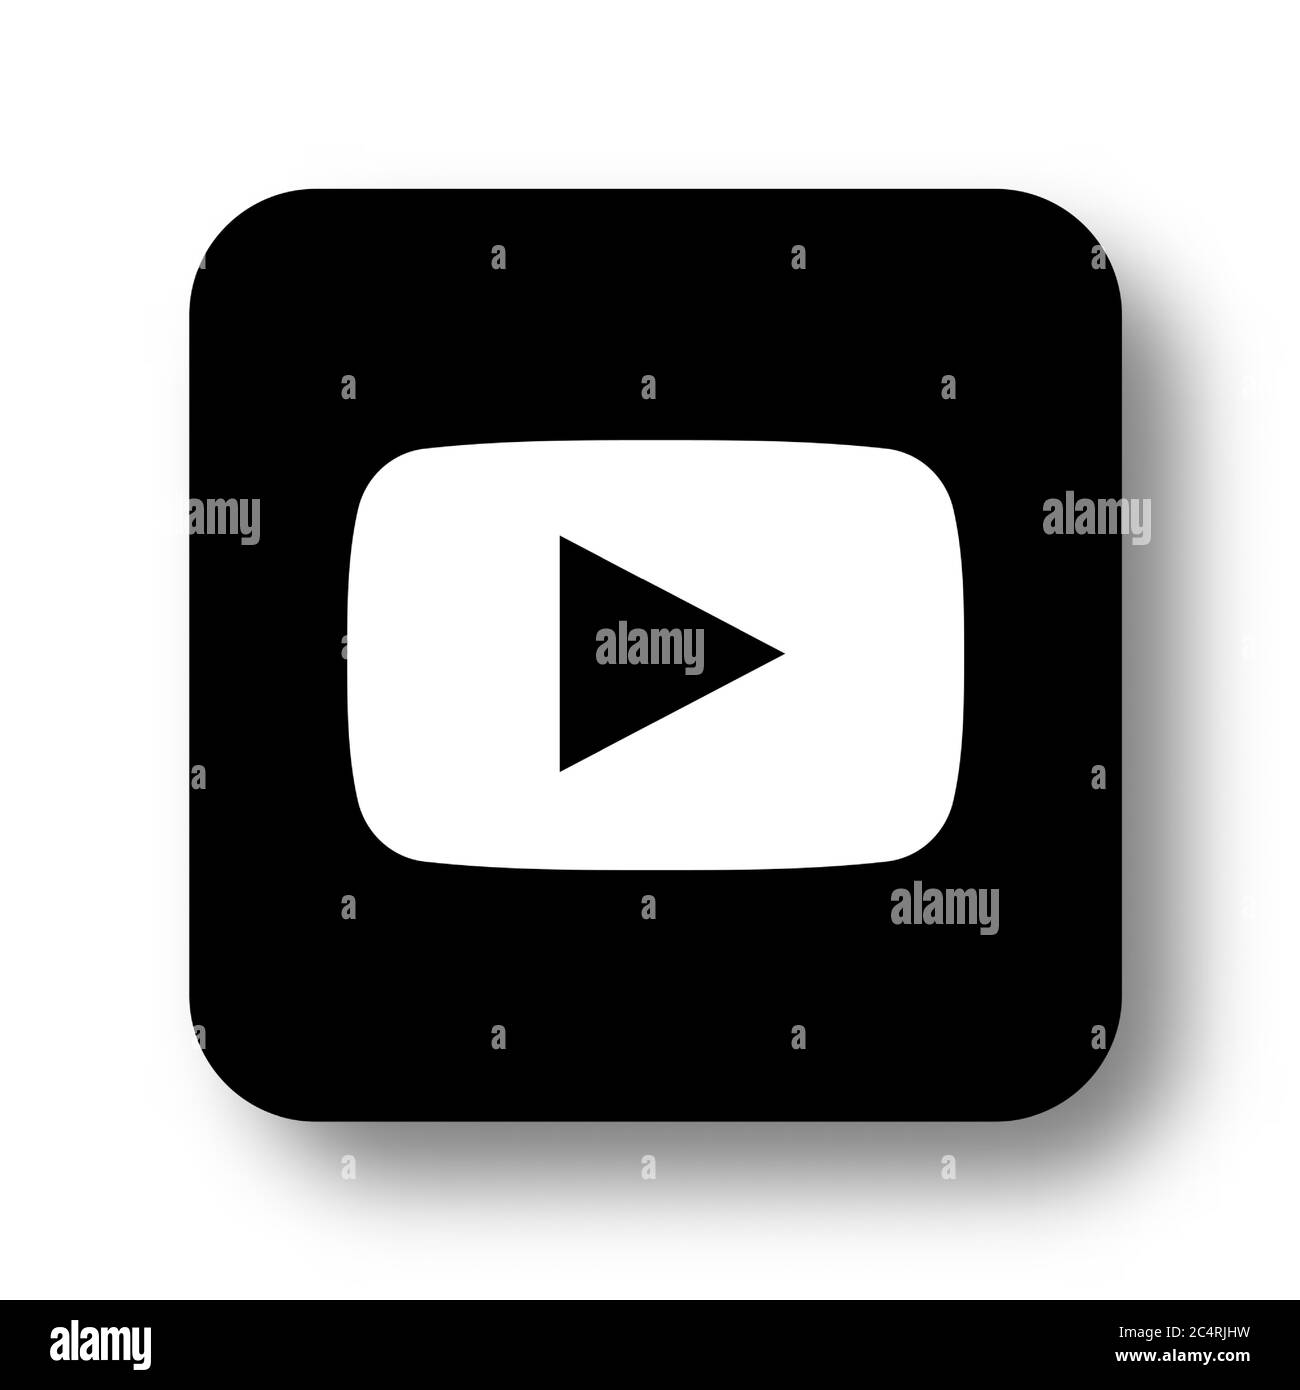 VORONEZH, RUSSIA - JANUARY 31, 2020: Youtube logo black square icon with soft shadow Stock Vector